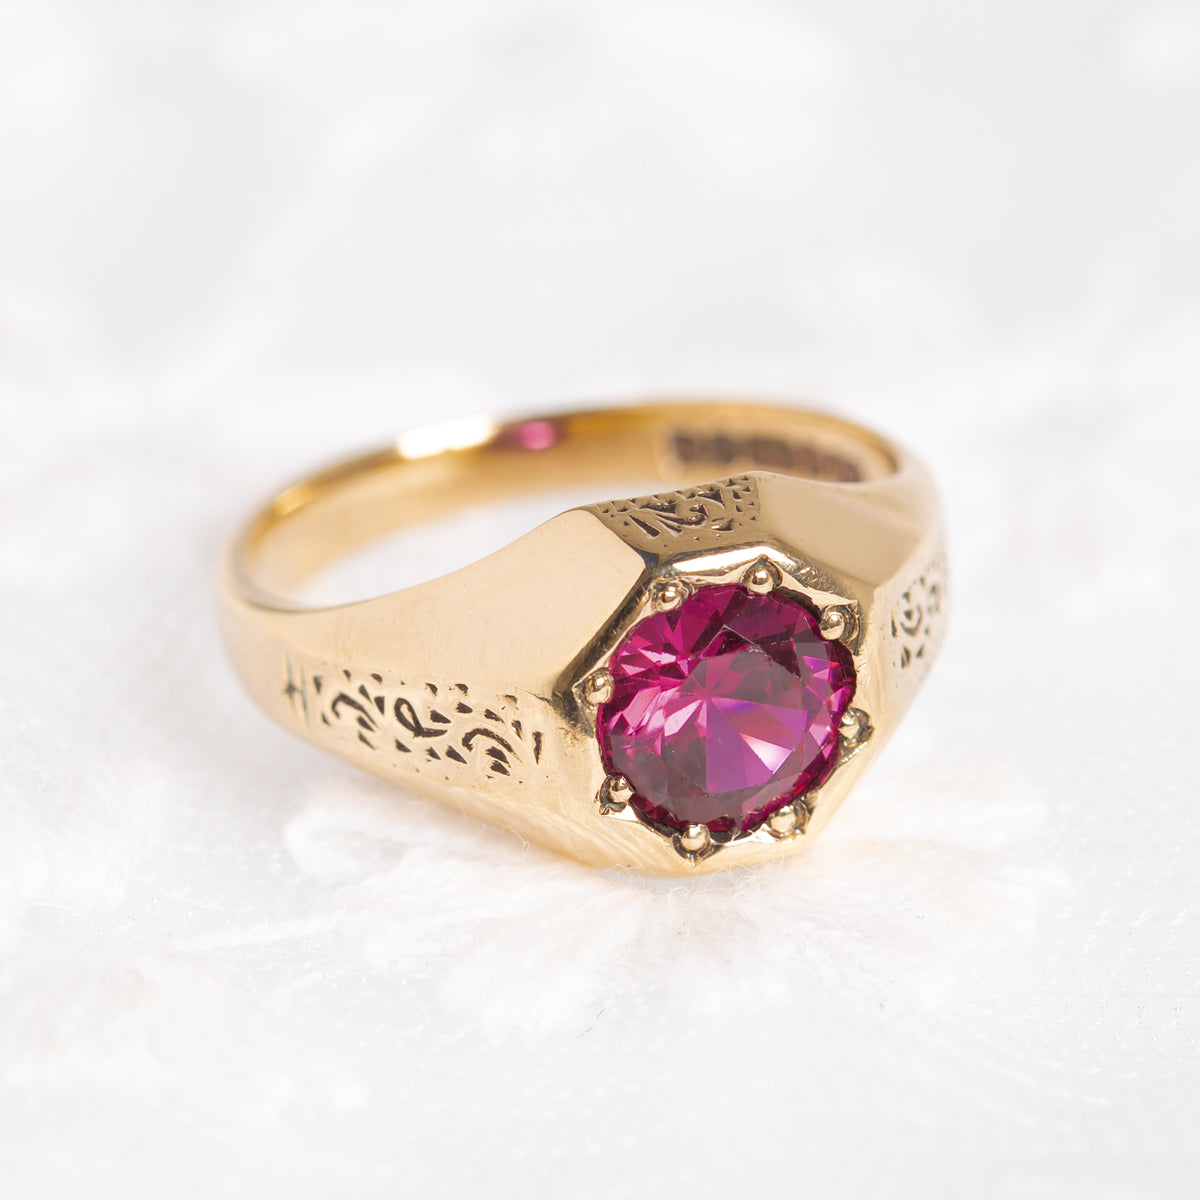 1ct Ruby Gemstone Gold Ring Vintage Estate Jewellery 9ct Gold  (A1382)